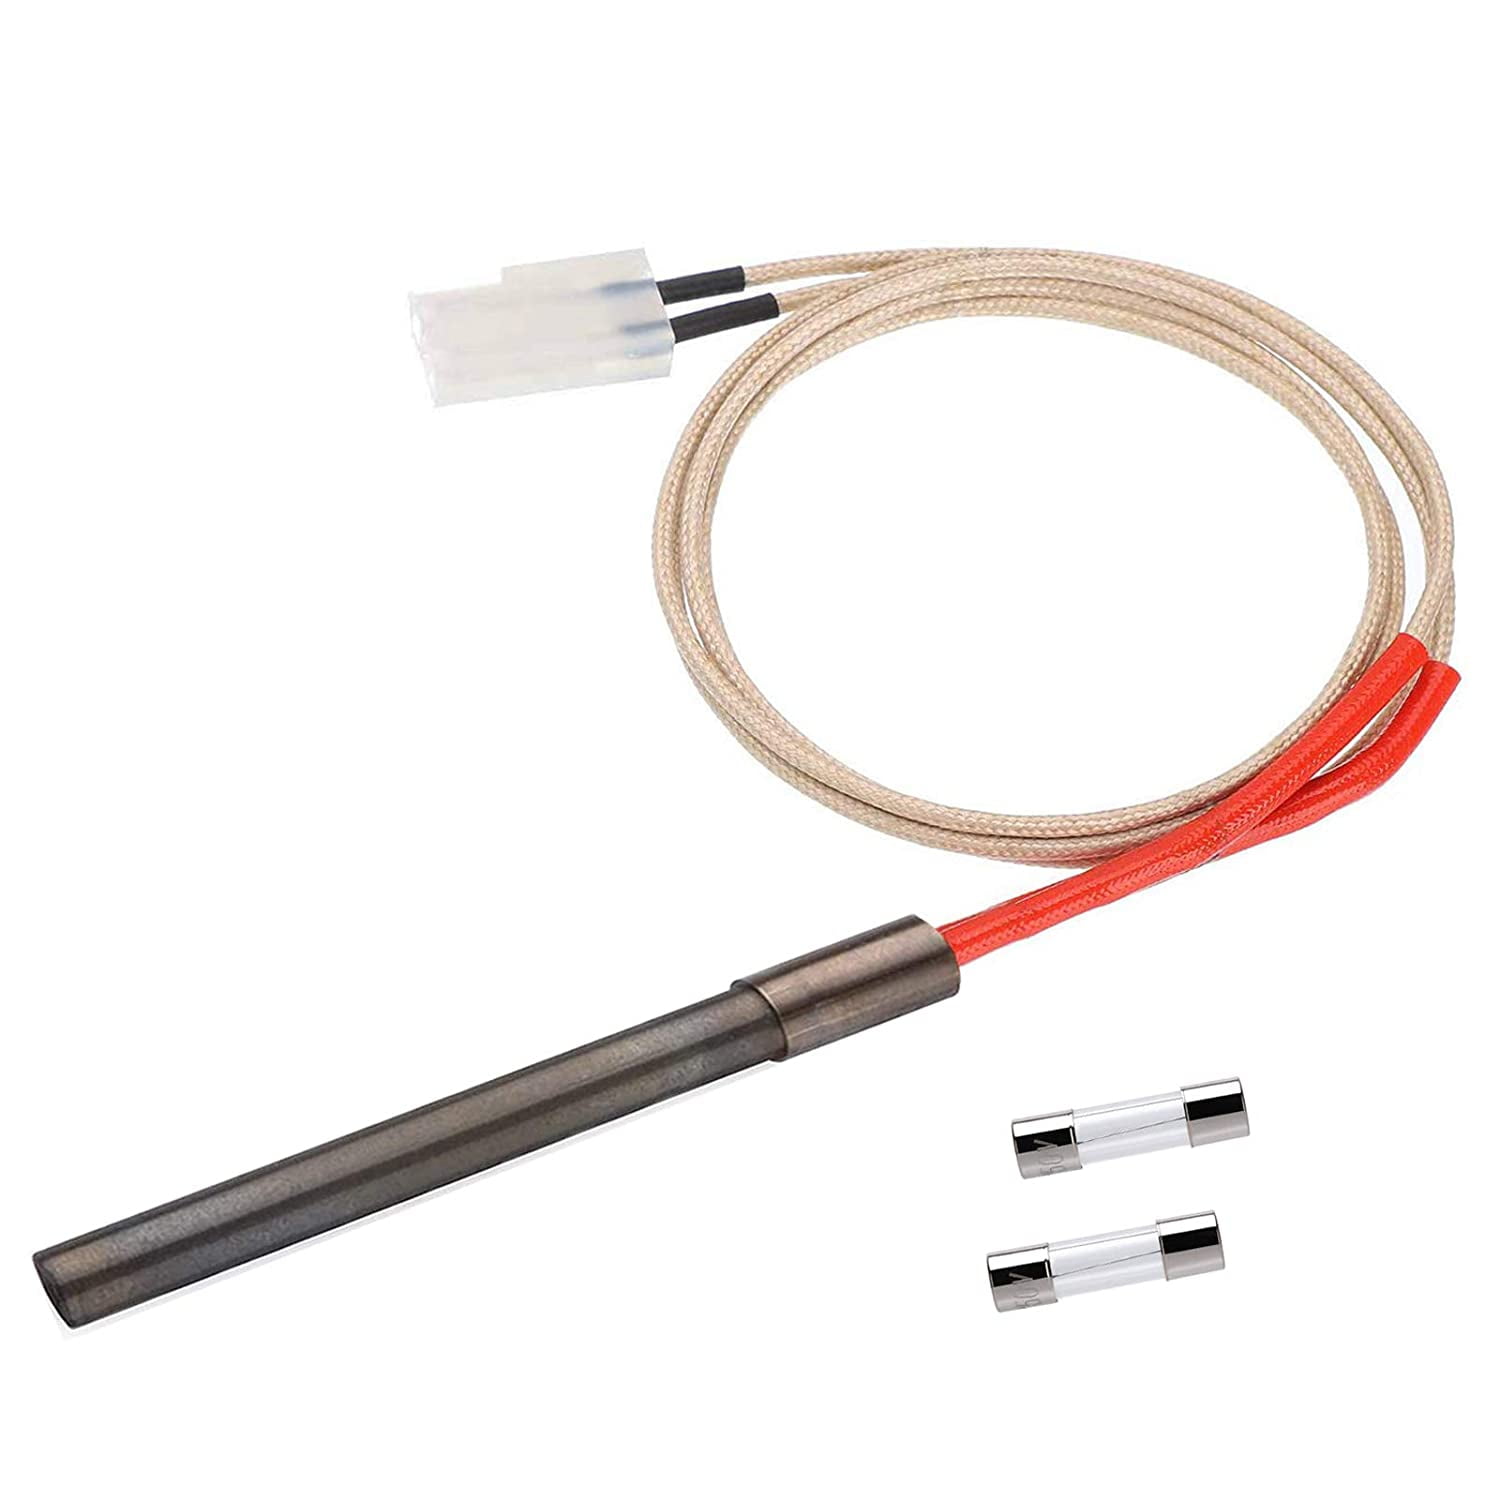 Ceramic Igniter Element Replacement for REC TEC, Recteq Wood Pellet Grill  and Smoker, 120V 80W